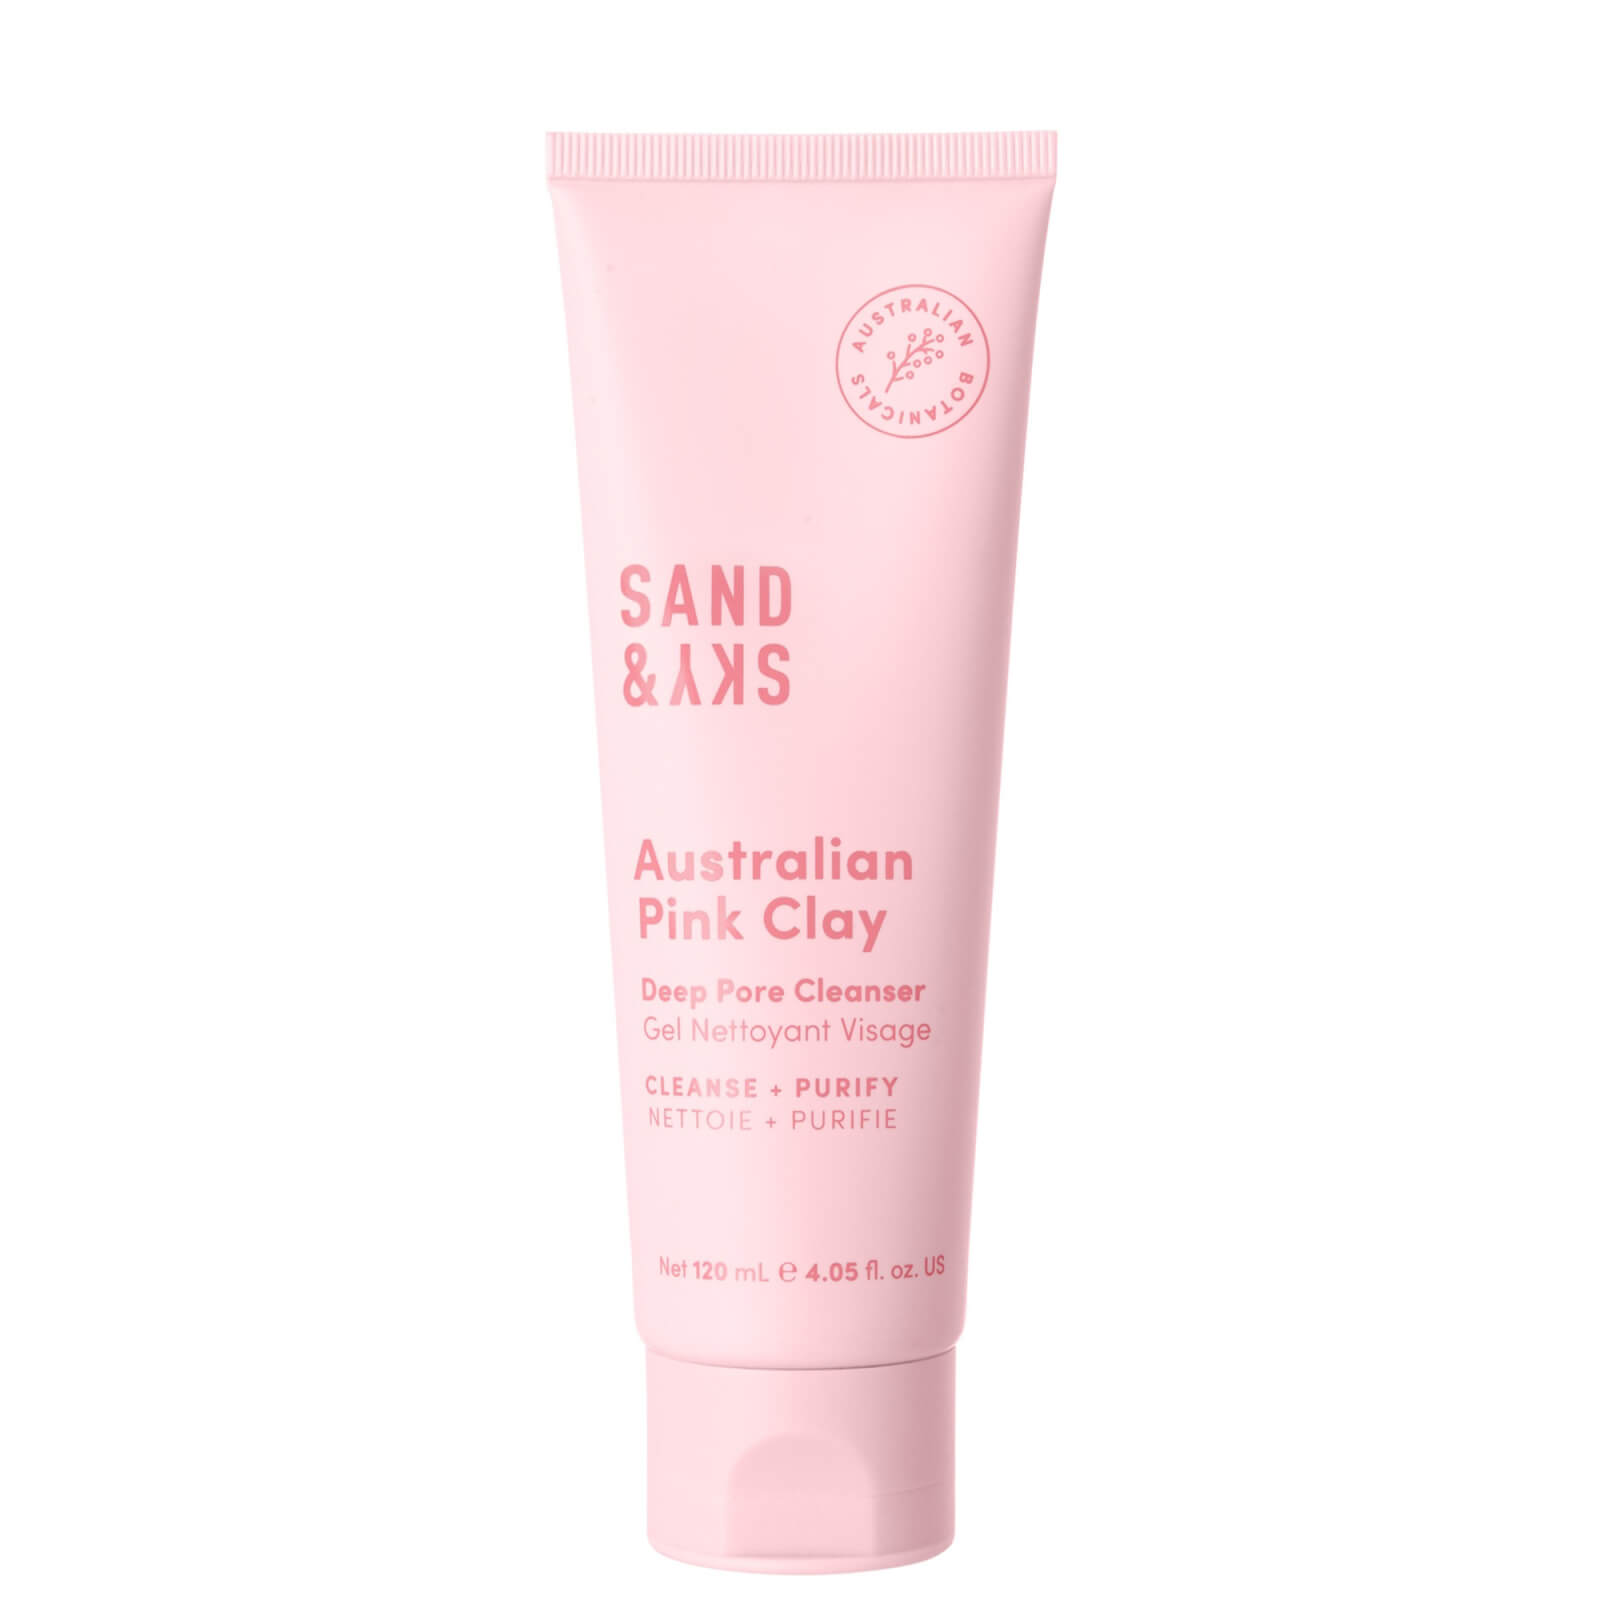 Image of Sand & Sky Australian Pink Clay Deep Pore Cleanser